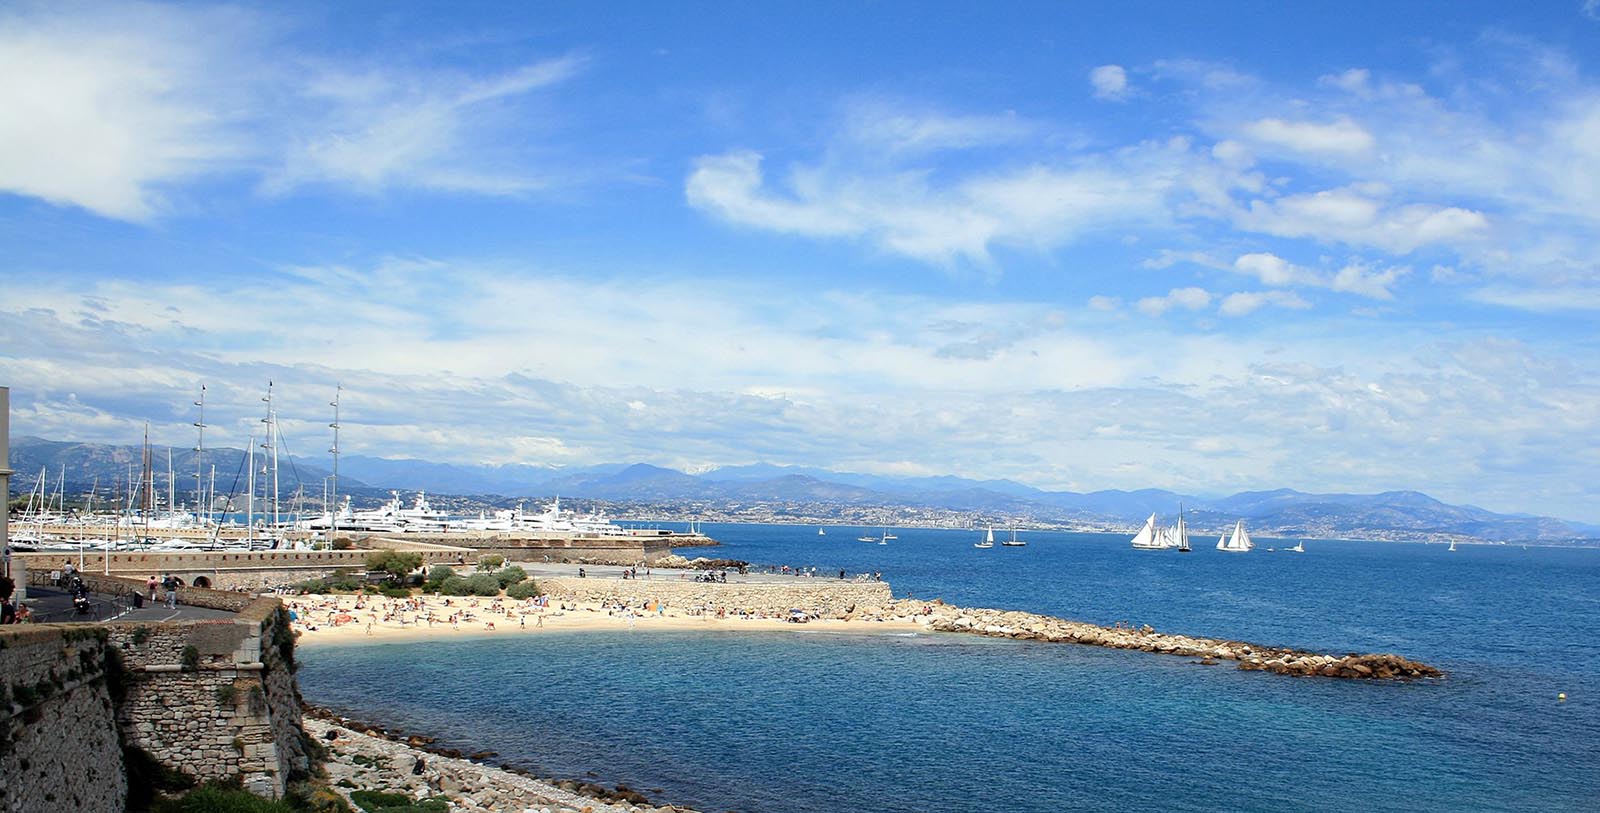 Experience the sheer beauty and revel in the azure waters of the Mediterranean at the Cap d’Antibes.